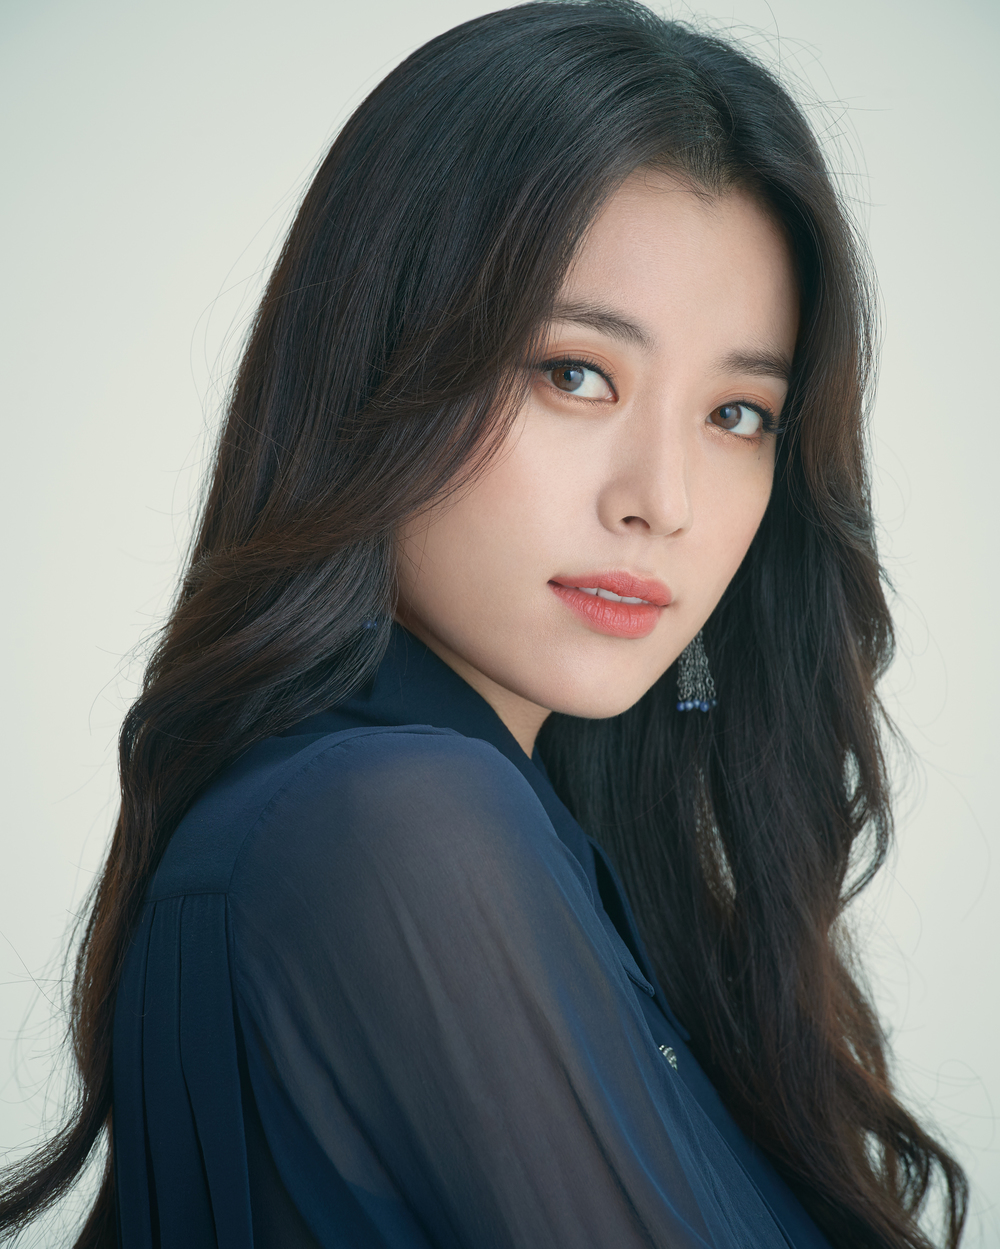 Han Hyo-joo said he was curious about the audiences response.Actor Han Hyo-joo, who starred in the movie Illang: The Wolf Brigade, confessed that acting was difficult in an interview held at a cafe in Samcheong-dong on the afternoon of July 25.Han Hyo-joo performed in Illang: The Wolf Brigade as Yoon Hee Lee, who shakes Lim Jung-kyung (Kang Dong-won)s heart.Han Hyo-joo said of his acting: Once I see myself on screen, I always try to look objective.I always try to see the character in the movie when I monitor the previous movies.  I tried to watch this movie, but Feelings said that it is strange than watching the previous movie.When I look at myself, I think I heard a lot of new Feelings, Unfamiliar Feelings Han Hyo-joo said, In fact, it is also the part I expected as an actor when I chose this movie.I thought, I want the bishop to take out new faces than the face I had, and I can get it out if it is the bishop.I was unfamiliar and happy to see such faces, and on the other hand I was worried.It was a bit more personal than familiarity, but I was worried about how those who accepted it would accept it.I wonder how many people will see about the character Yoon Hee Lee.I hope it is a character who is sympathetic and compassionate, but that is my wind. Han Hyo-joo said, I saw an interview that the director said I was a good actor who played a stable performance.I should break the frame in a stable one. You did this? You did this? I wanted to show you the way you broke that frame, the acting.When I played the god, I thought I should do this rhythm with a lot of simulations while drawing in my head how to act, but in fact I went to the scene and Feelings heard the rhythm breaking.Turning my calculations off with instantaneous and improvised Feelings? There was a directors directory and I tried to break it myself. My face was strange on the screen.I think thats the part. I do not know the expression, the face I saw for the first time, or that part came out in the middle. So, Yoon Hee Lee was the most difficult character Han Hyo-joo has ever met since his debut.Han Hyo-joo said, I was worried about the first time I received the scenario, so I was wondering if the audience could follow this character well.Is it true or part of what youre talking about? Im confused in this way.I always talked to the bishop about the part that caught such things because there were many shaking processes while acting. The process of catching the character was difficult. bak-beauty